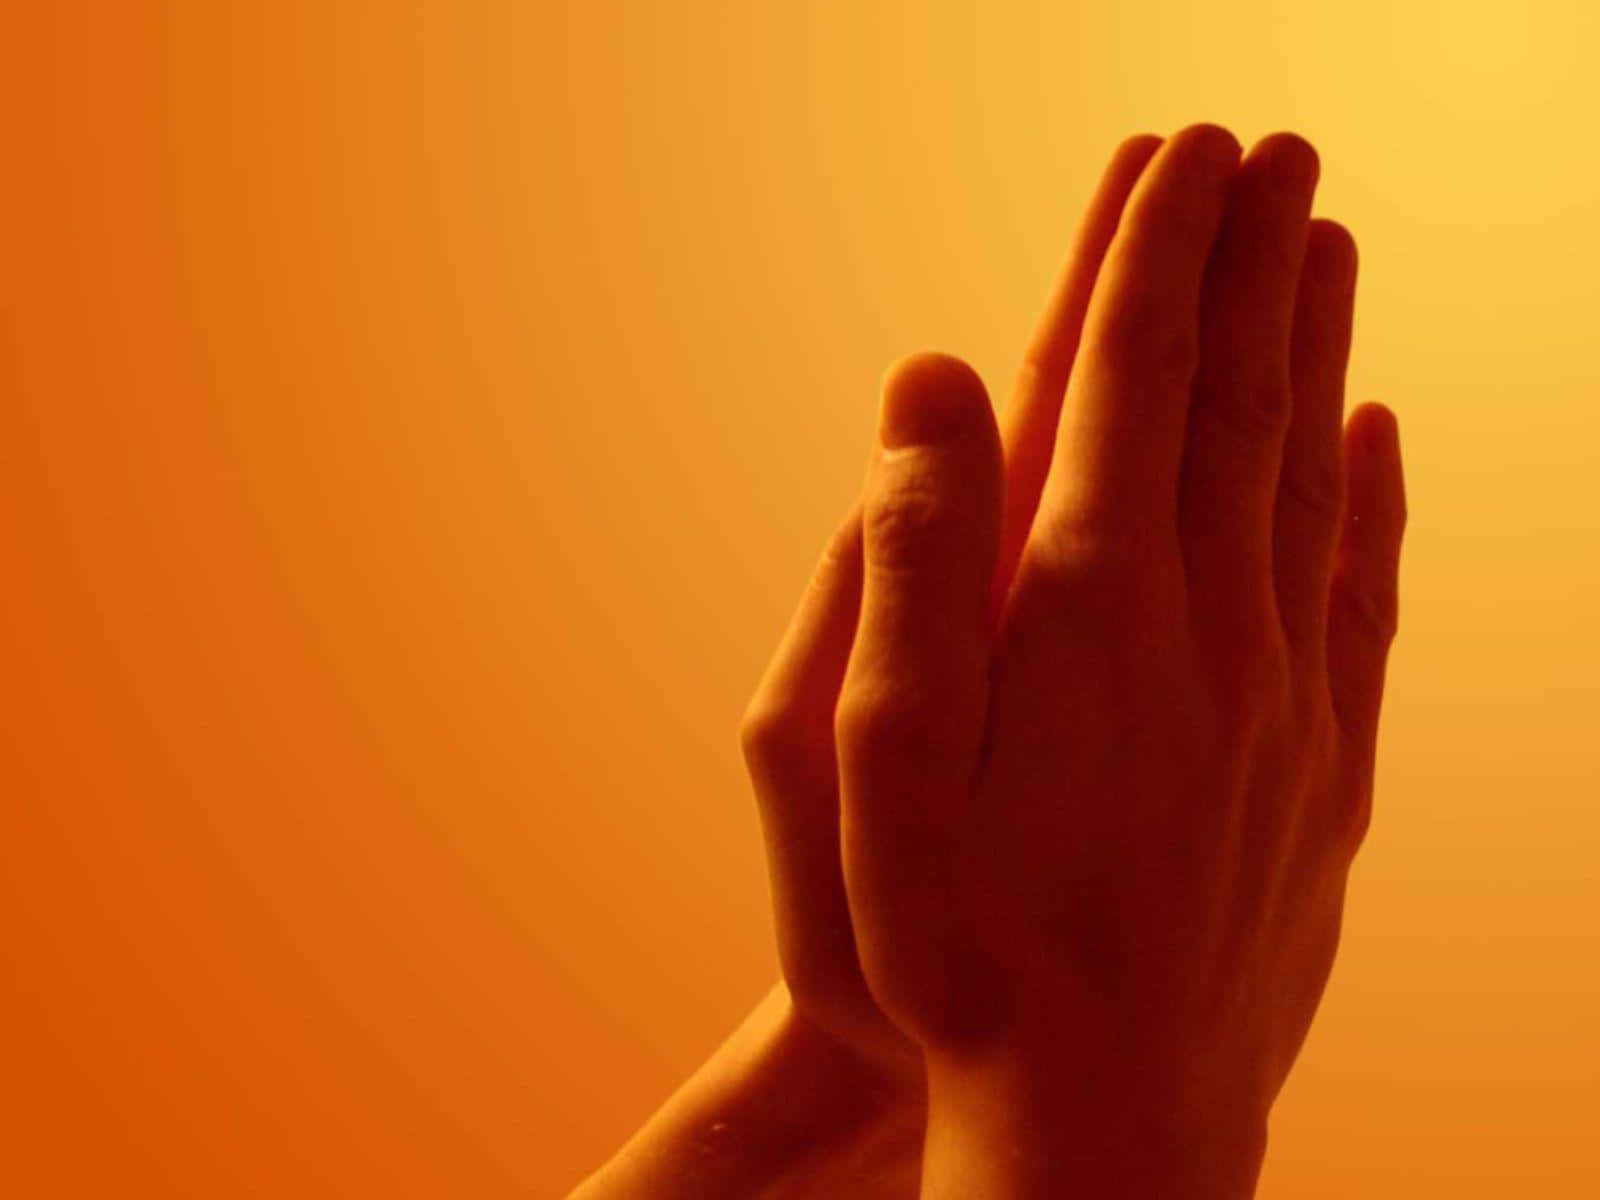 A Woman's Hands Are Clasped In Prayer Against An Orange Background